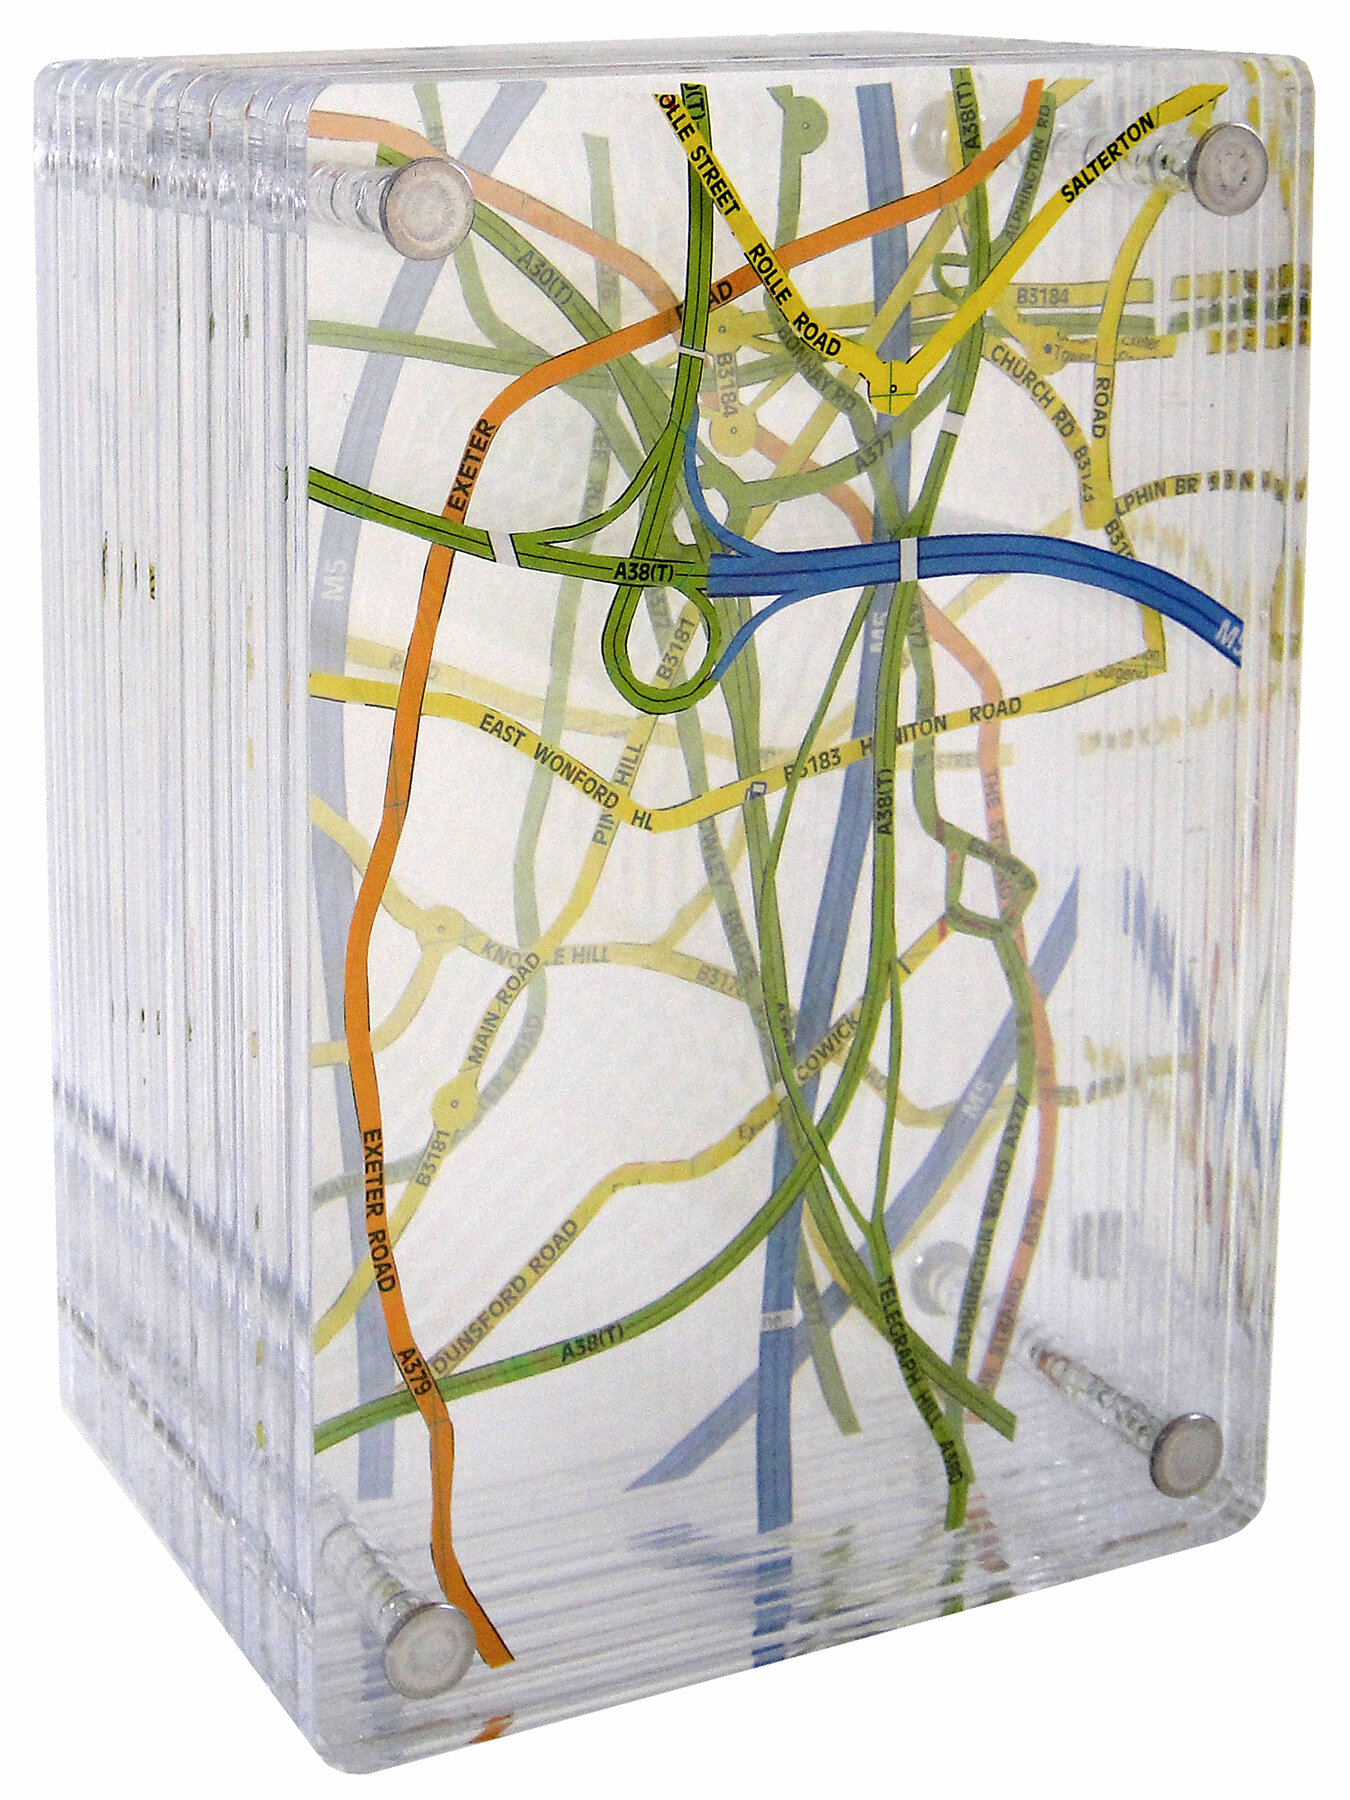   Get By;   excavated vintage map, acrylic, metal;    6.75h x 4.75w x 3.5d inches 